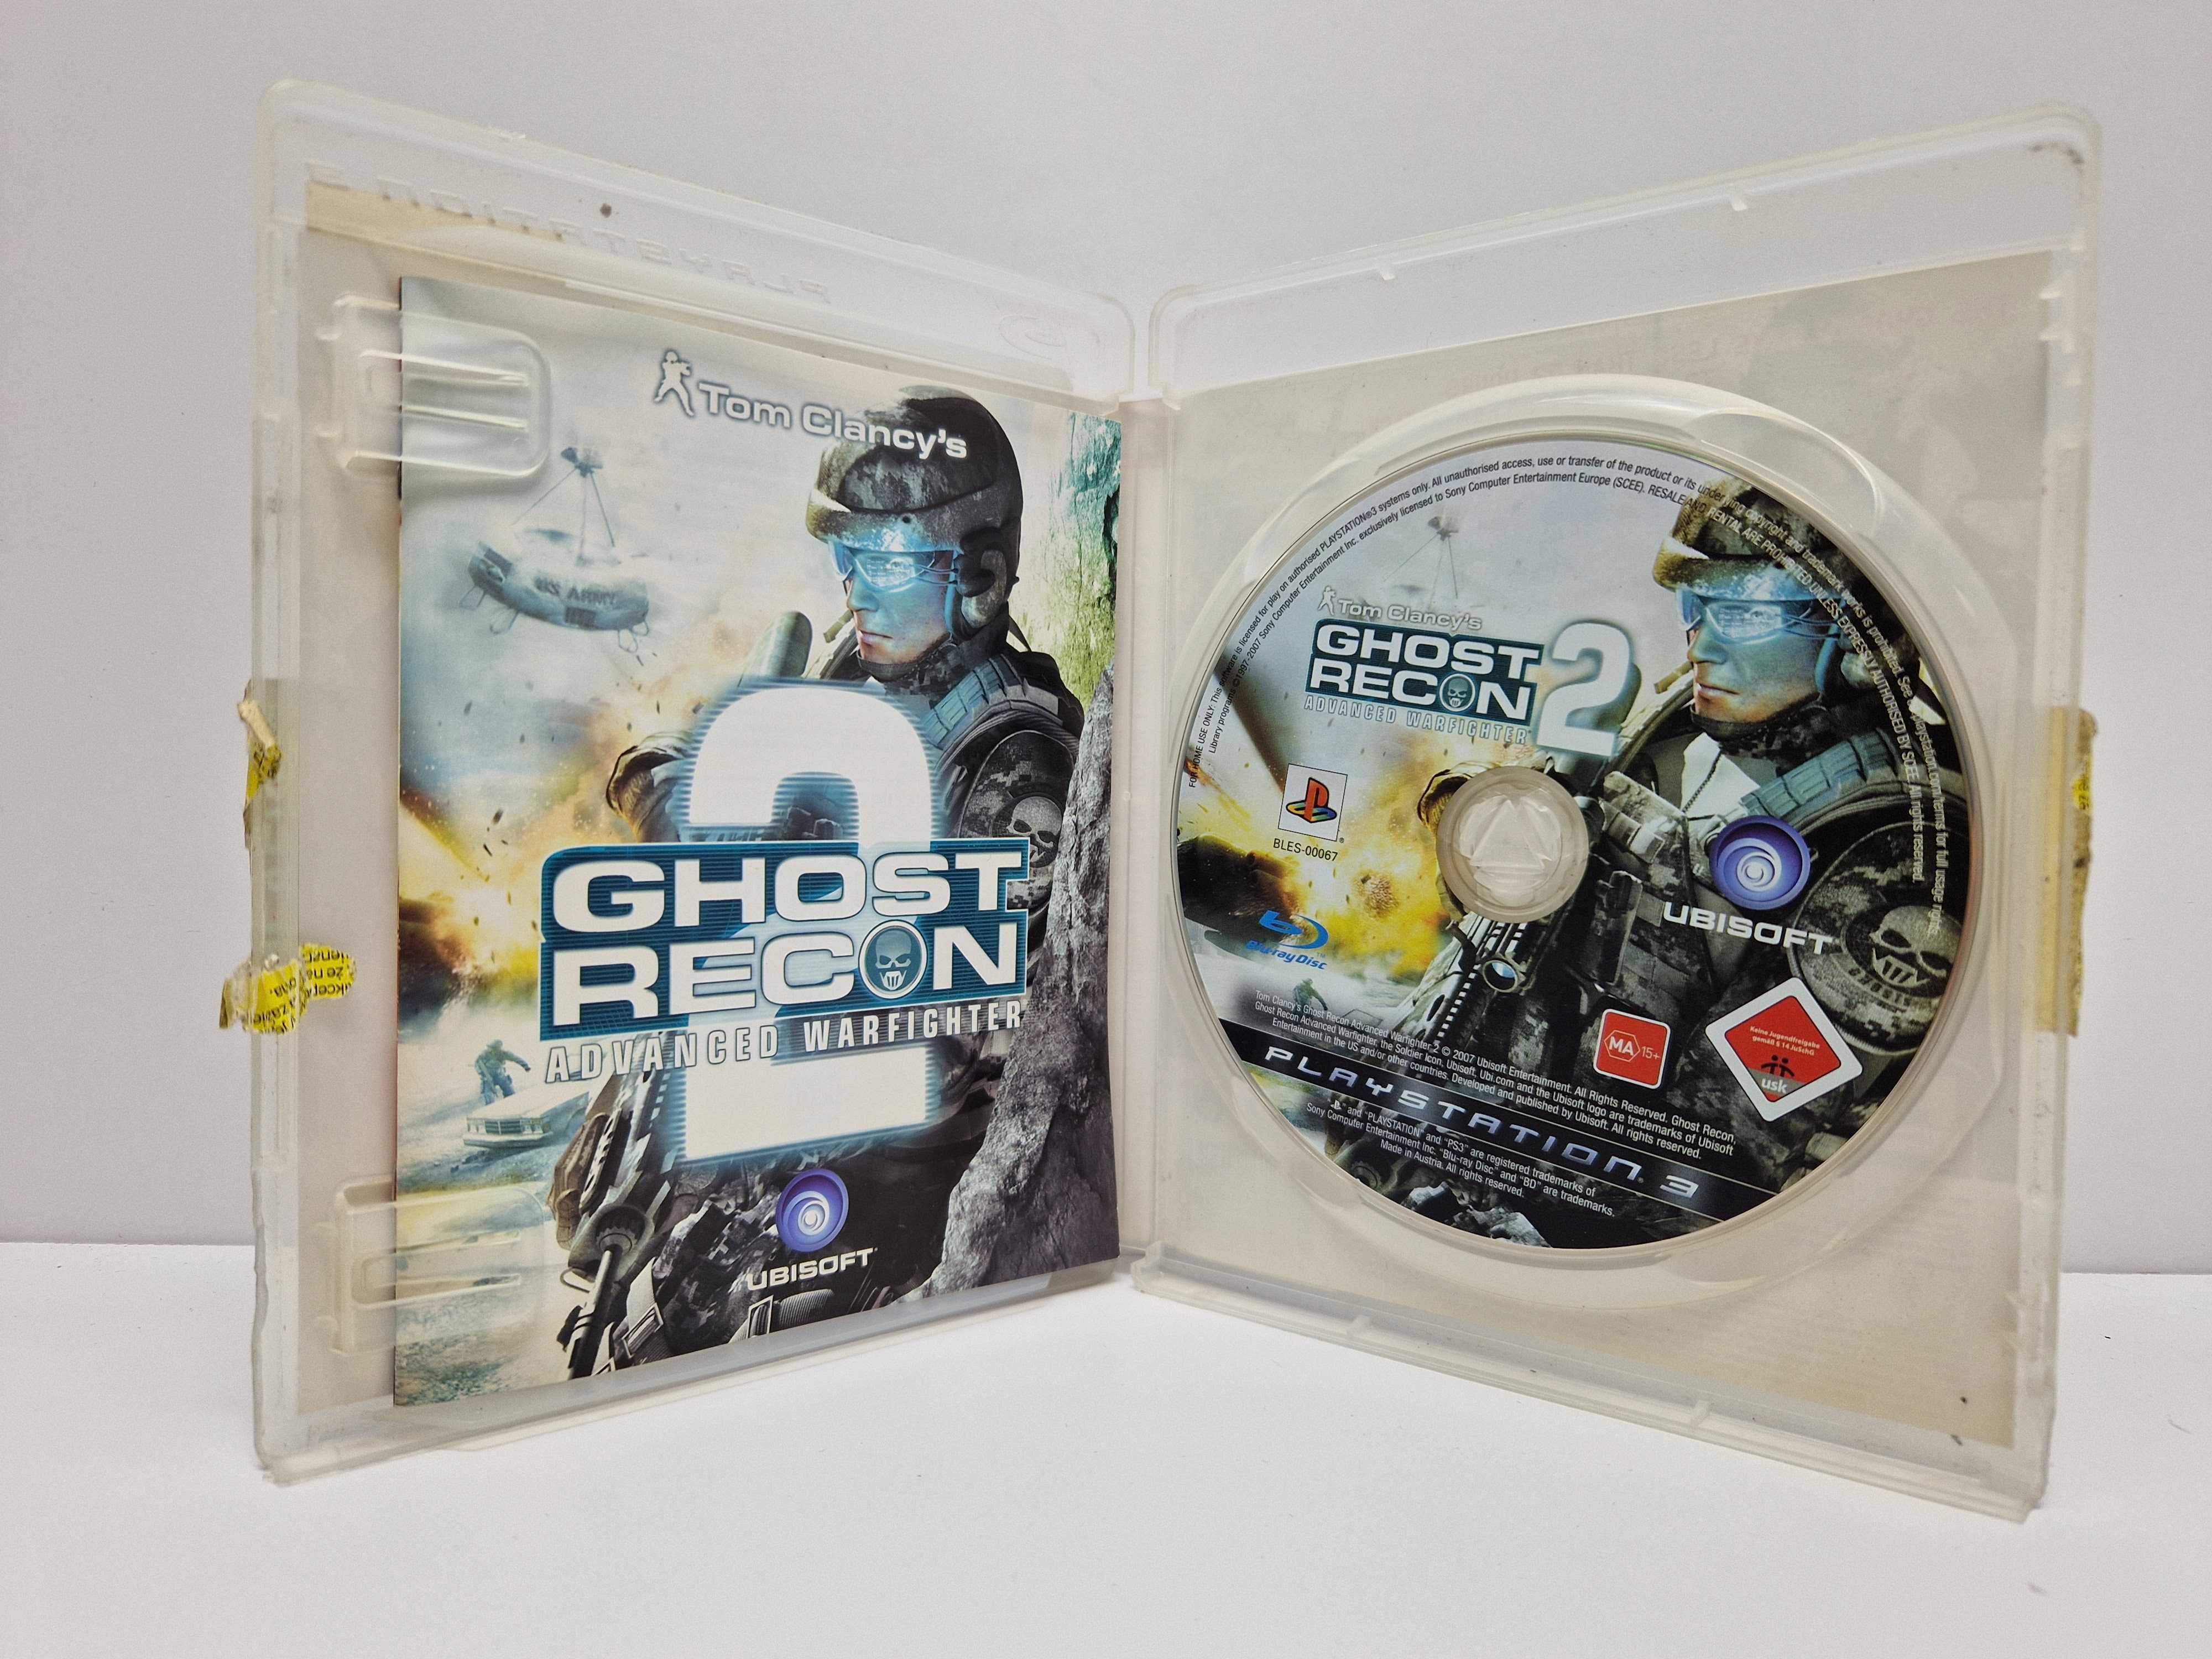 Gra Play Station 3 Tom Clancy's Ghost Recon